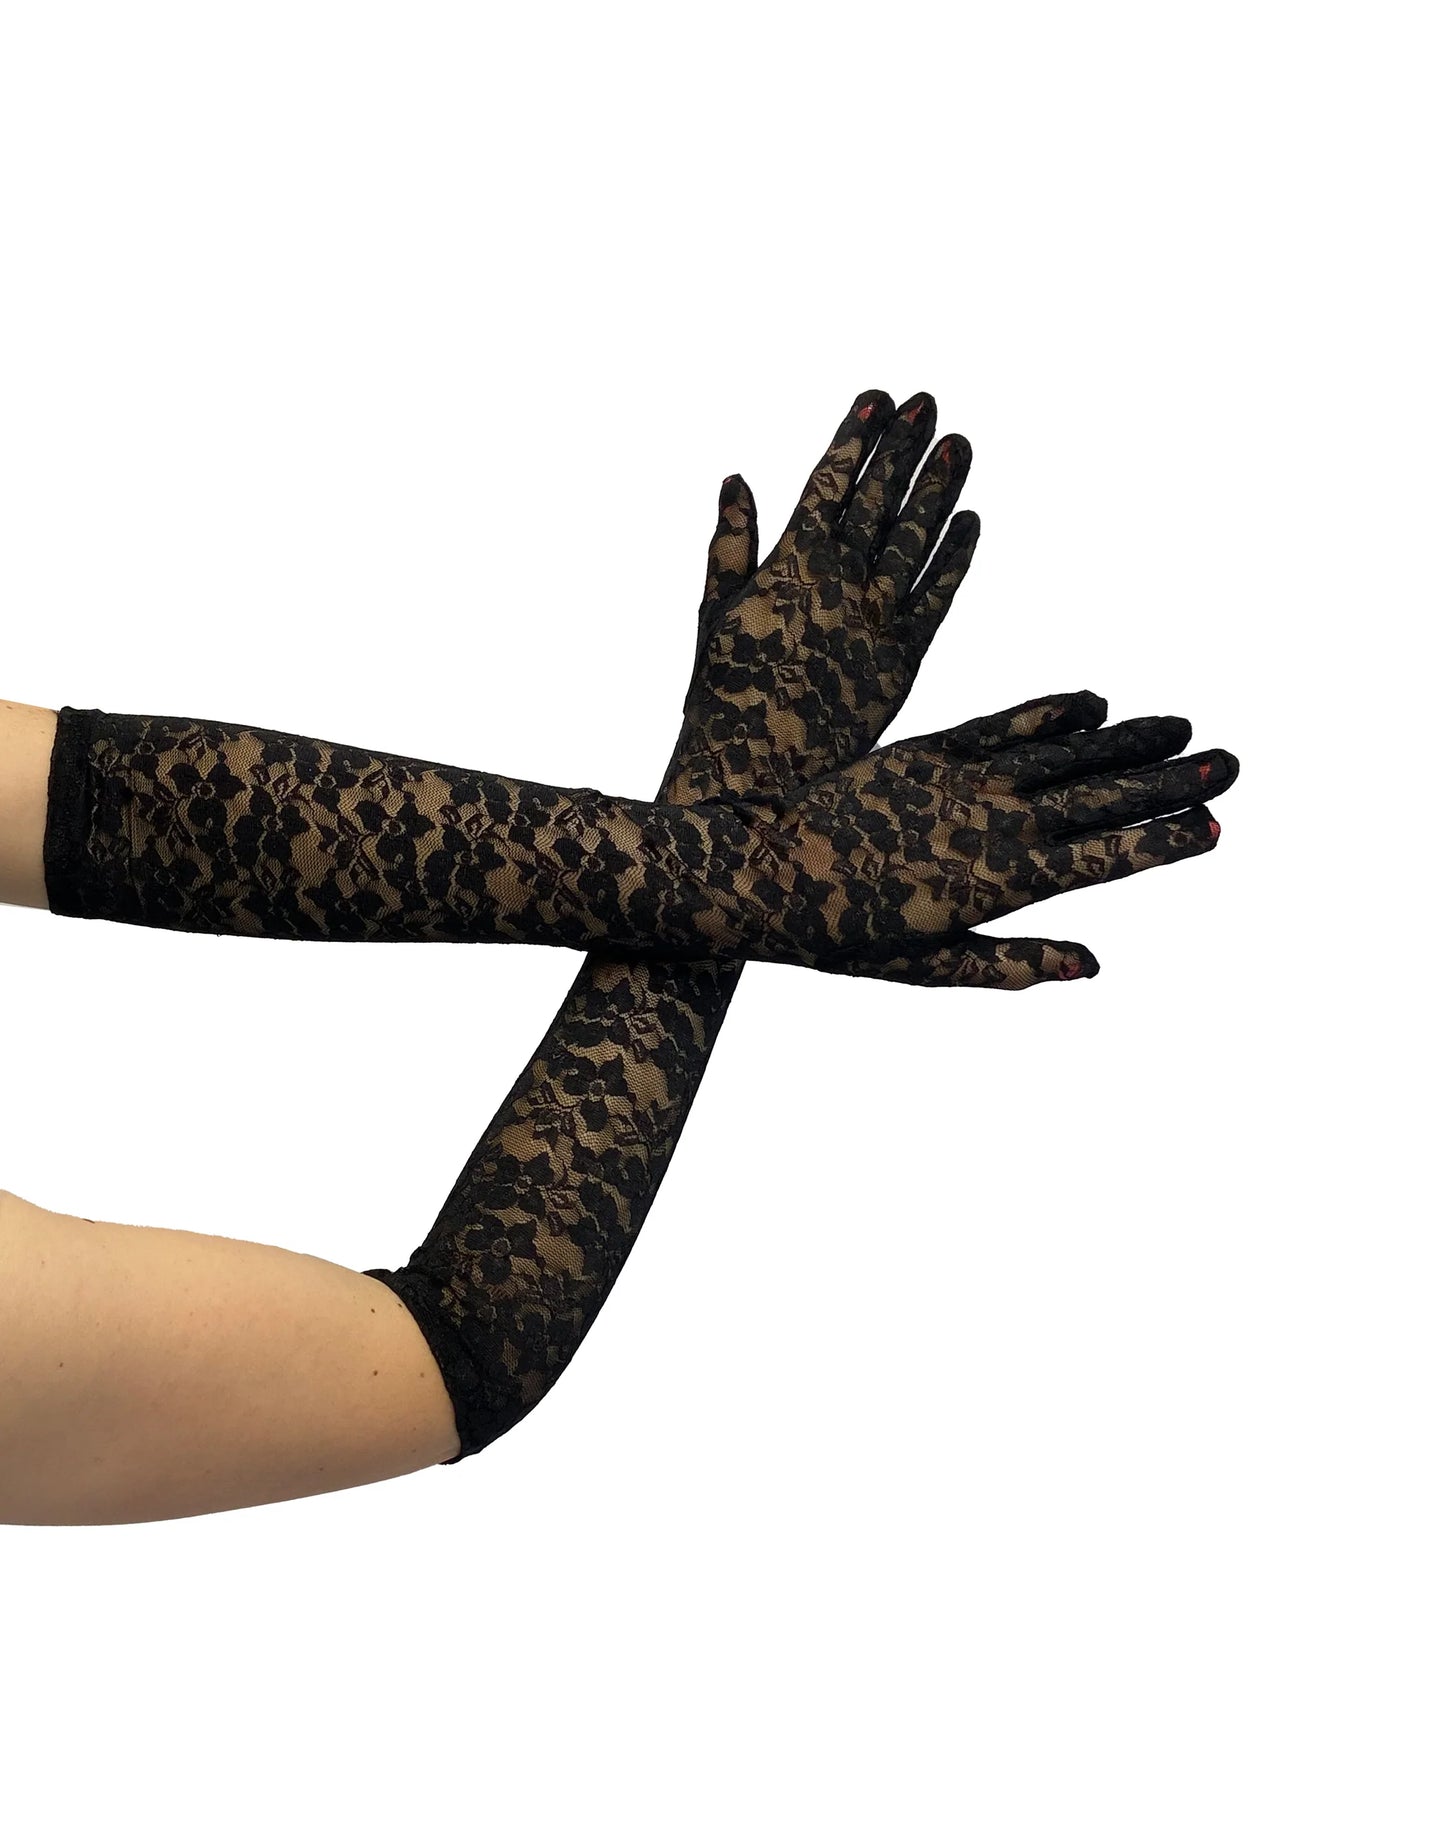 Pamela Mann Opera Lace Gloves - Black floral lace long over the elbow gloves.